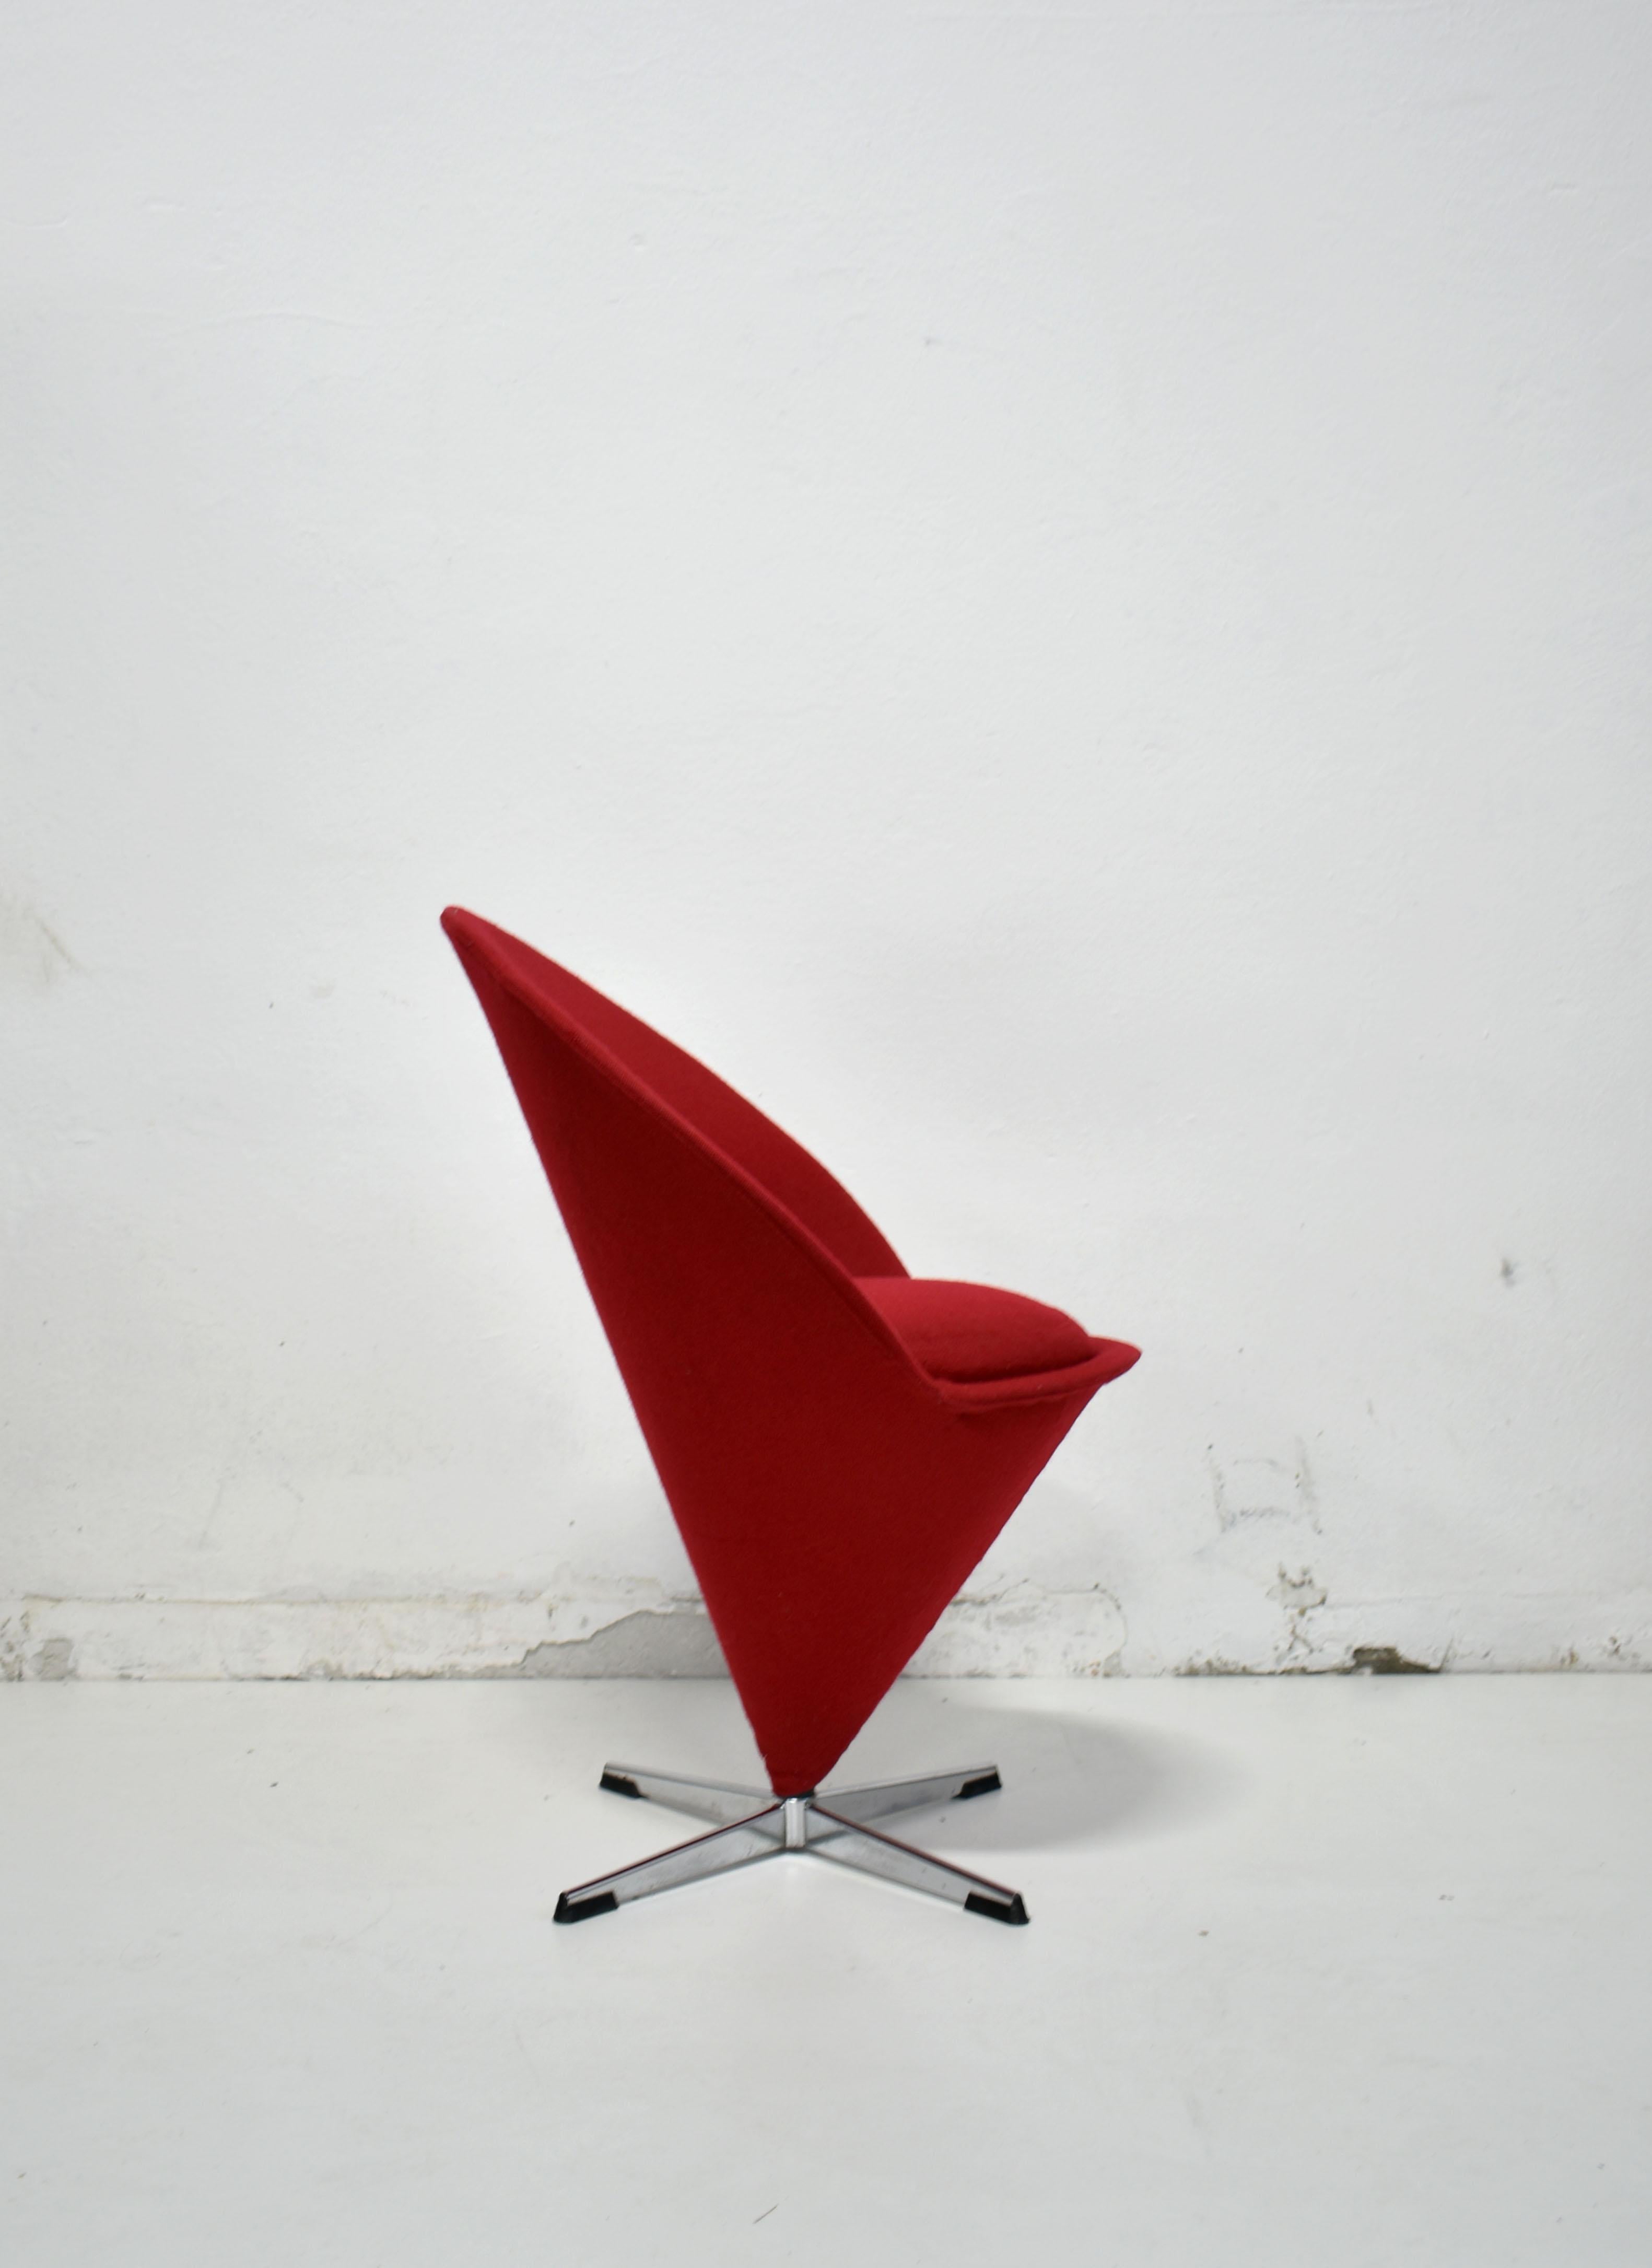 Iconic swivel 'Cone' chair designed in 1958 by famous Danish designer Verner Panton.

Made by Plus-Linje, Denmark. Production started in 1958.

The chair has original upholstery. Structure and legs are made of chrome-plated steel.